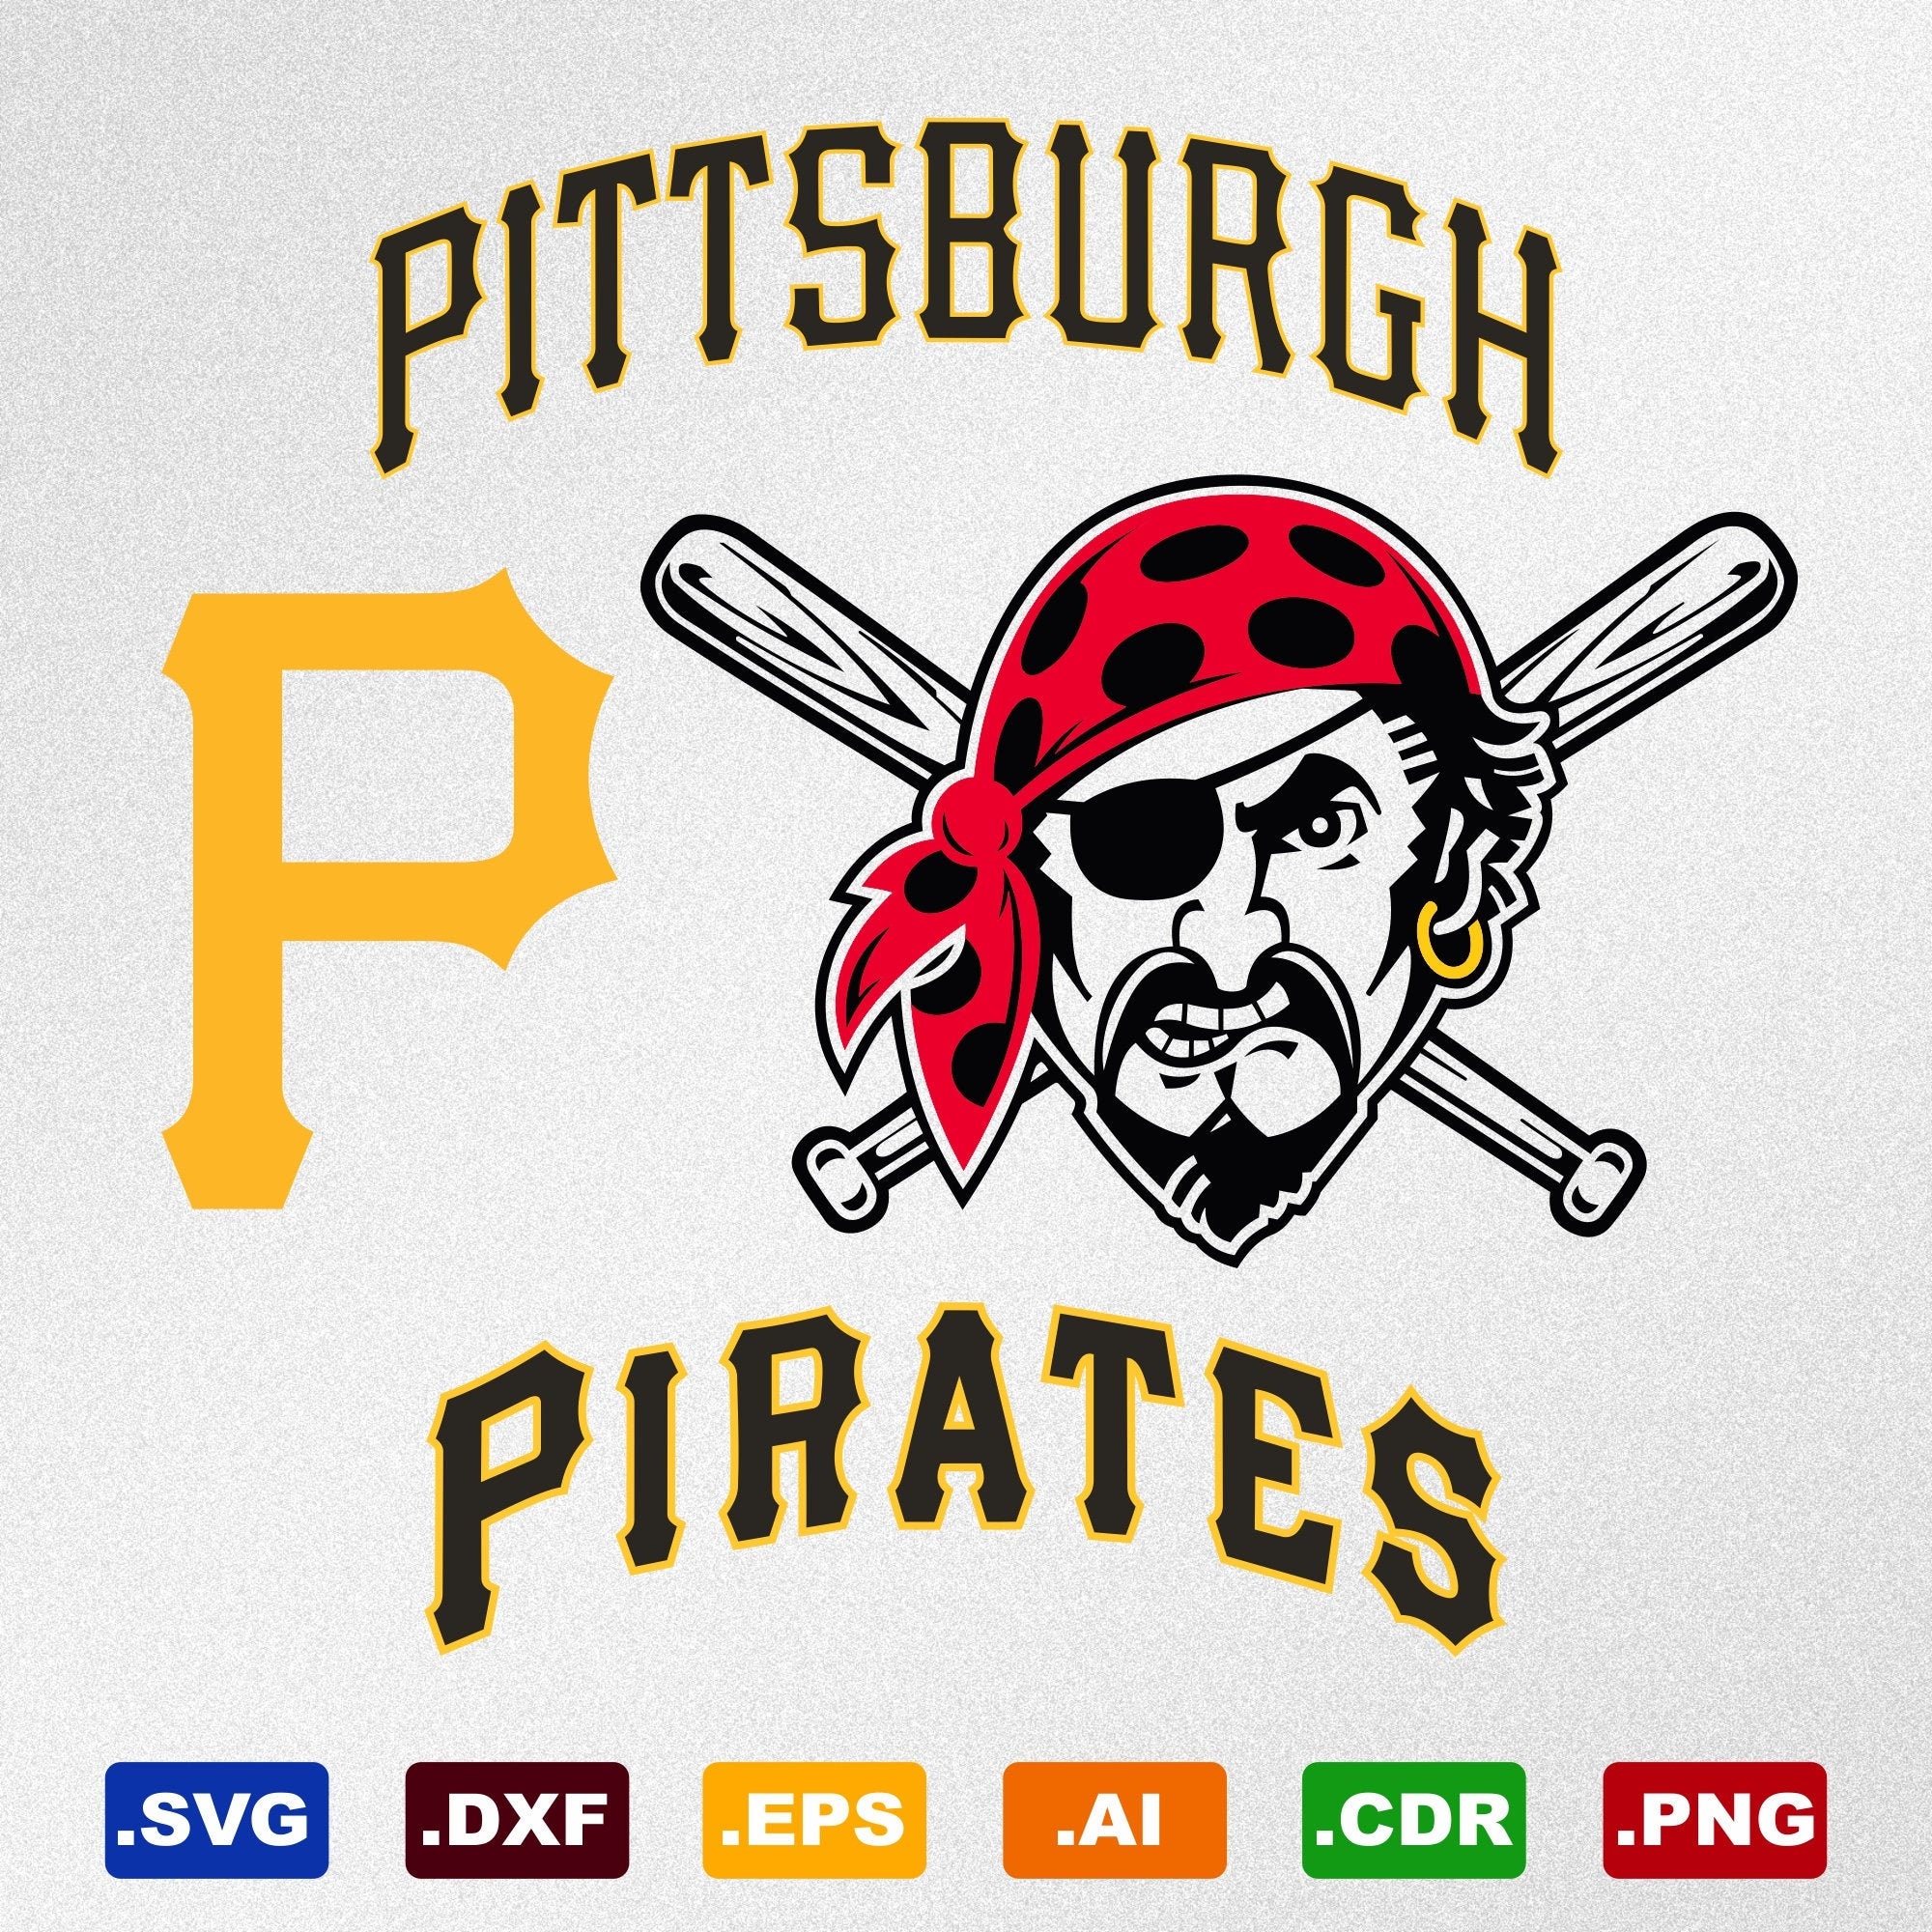 Pittsburgh Pirates Svg Dxf Eps Ai Cdr Vector Files for | Etsy